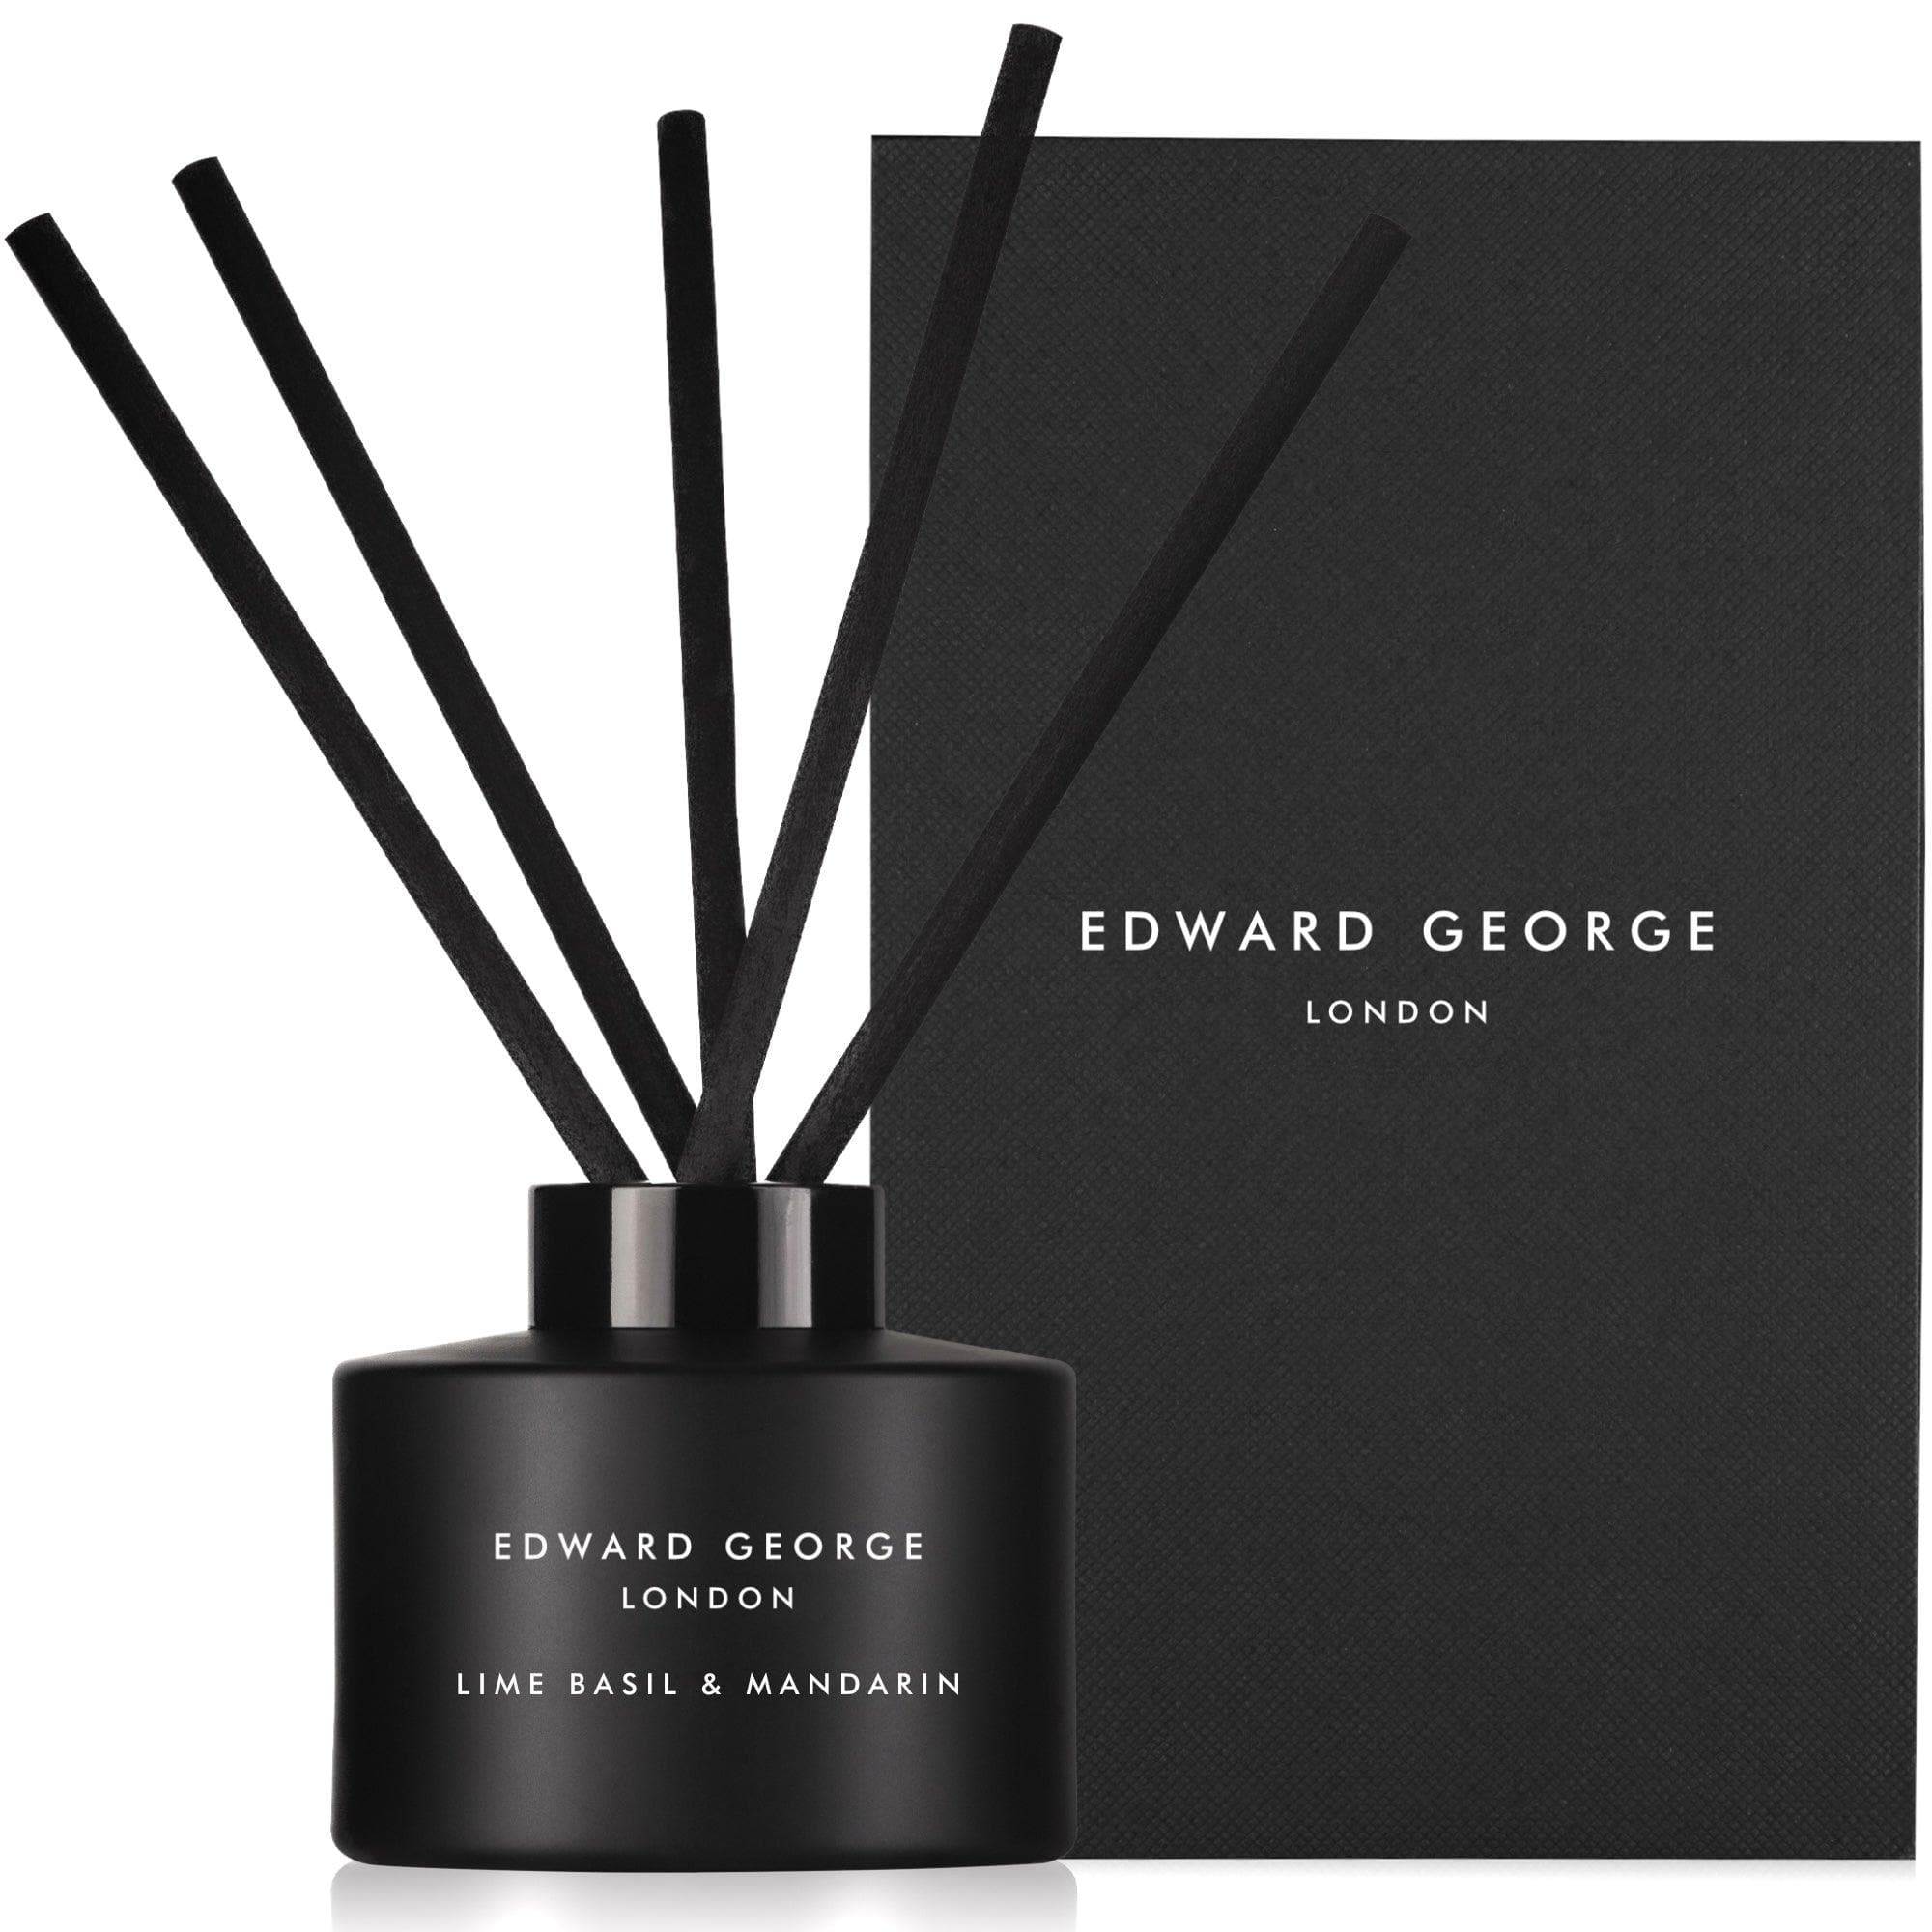 lime basil mandarin reed diffusers refills home fragrance decor room edward george london infographic luxury gift ritual scented england sticks scent oil diffuser refill women men black